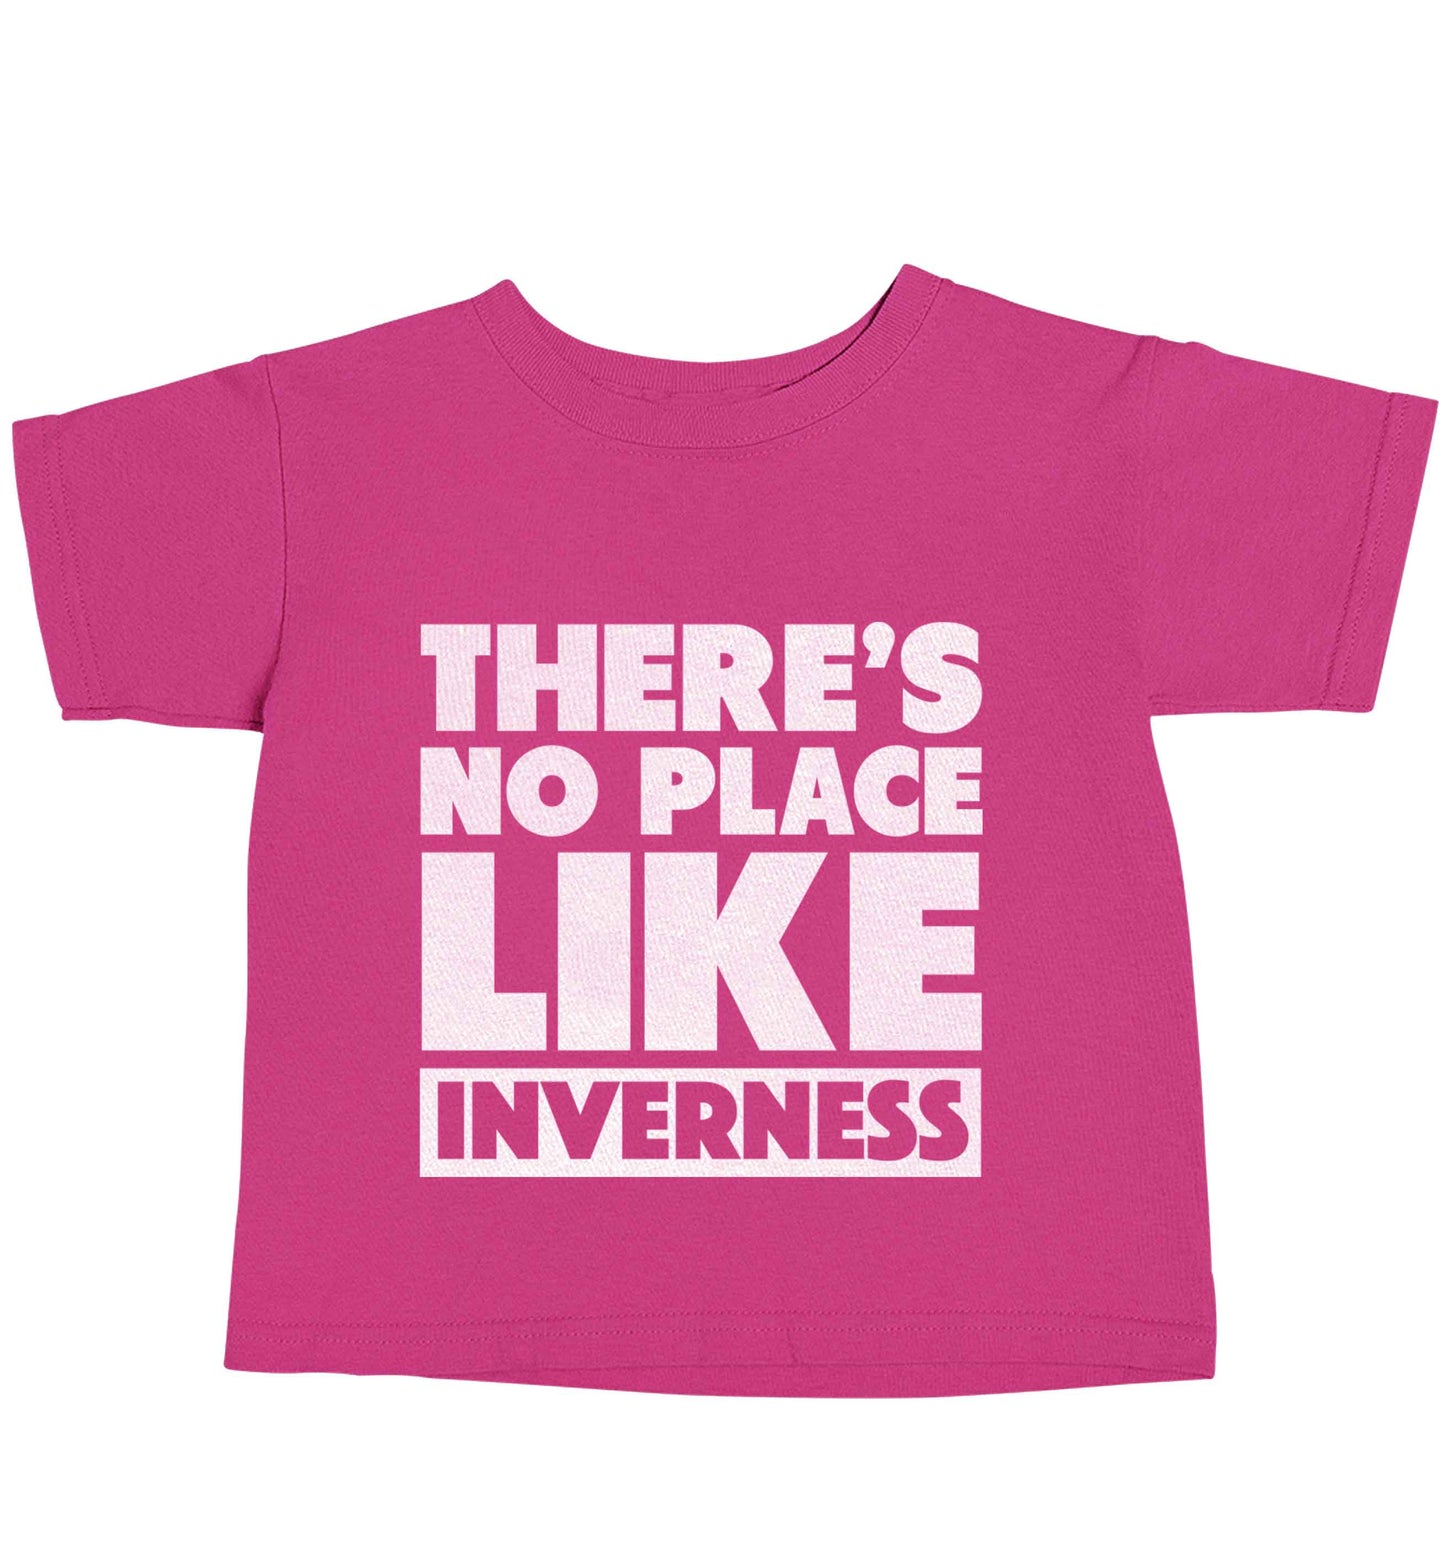 There's no place like Inverness pink baby toddler Tshirt 2 Years